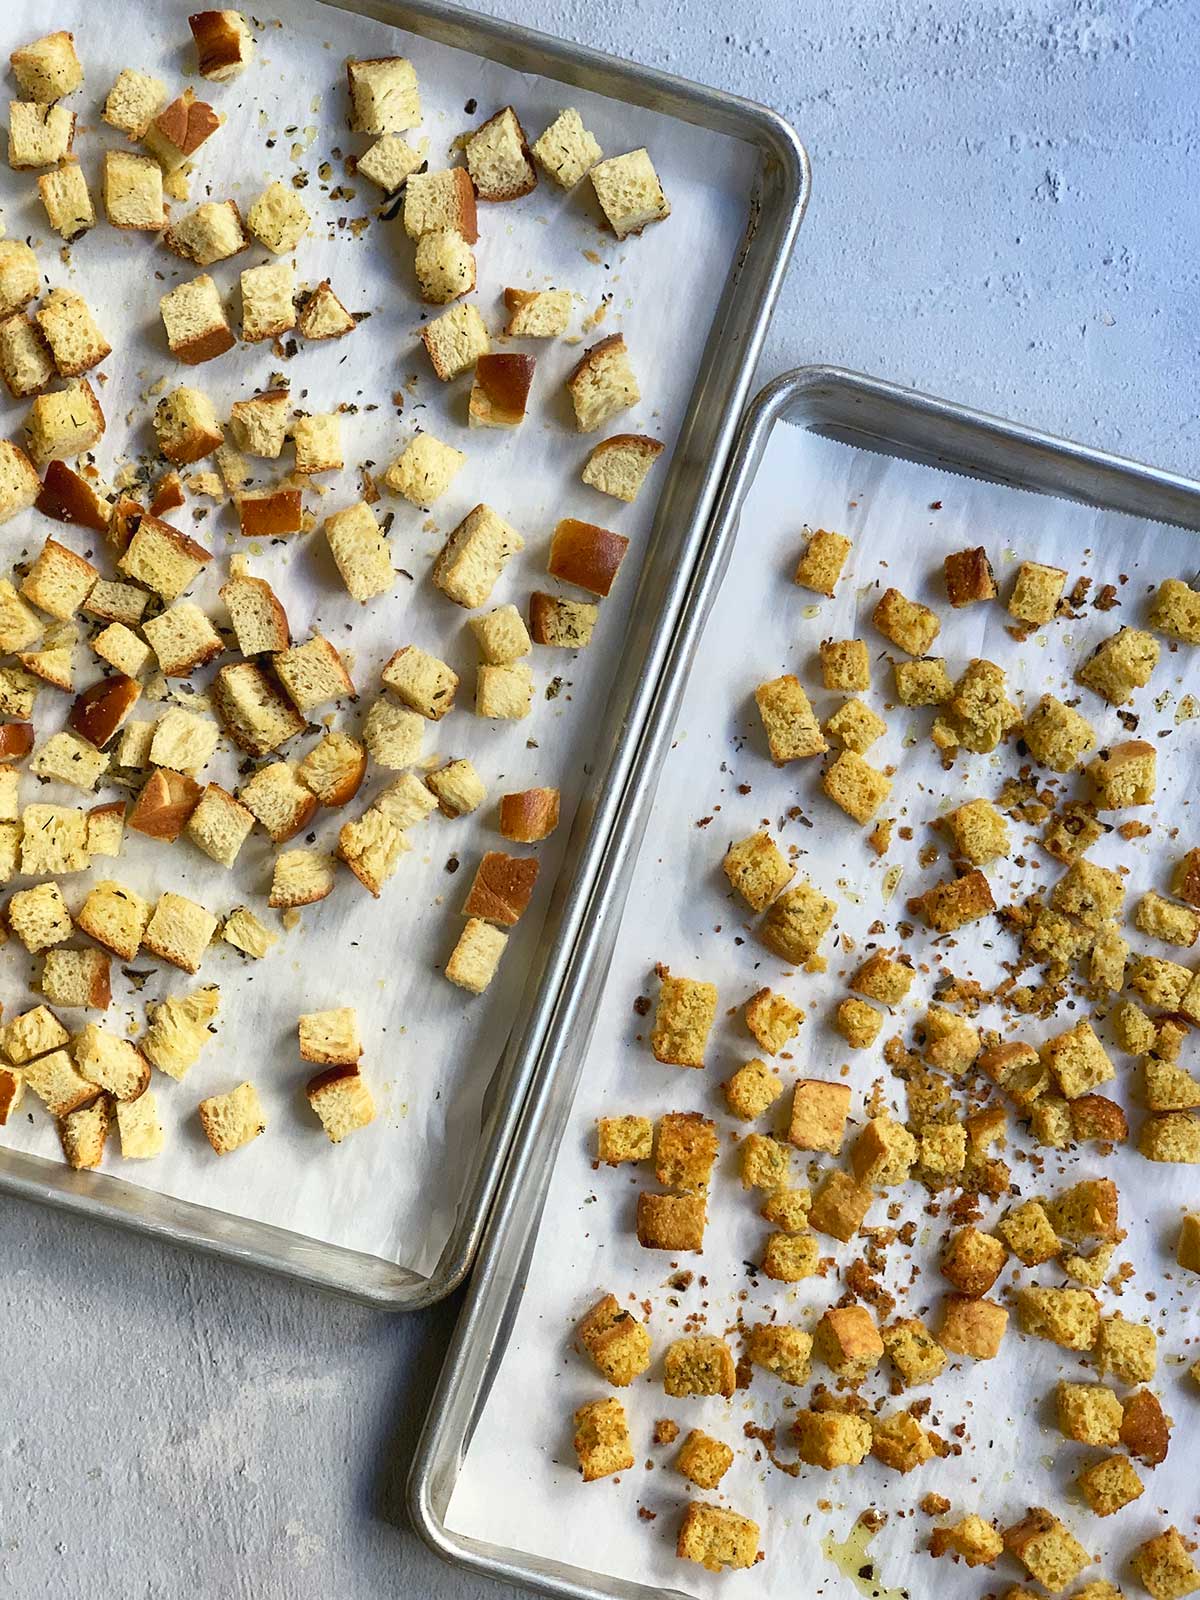 Two trays of baked stuffing cubes - cornbread and challah - shown at an angle.